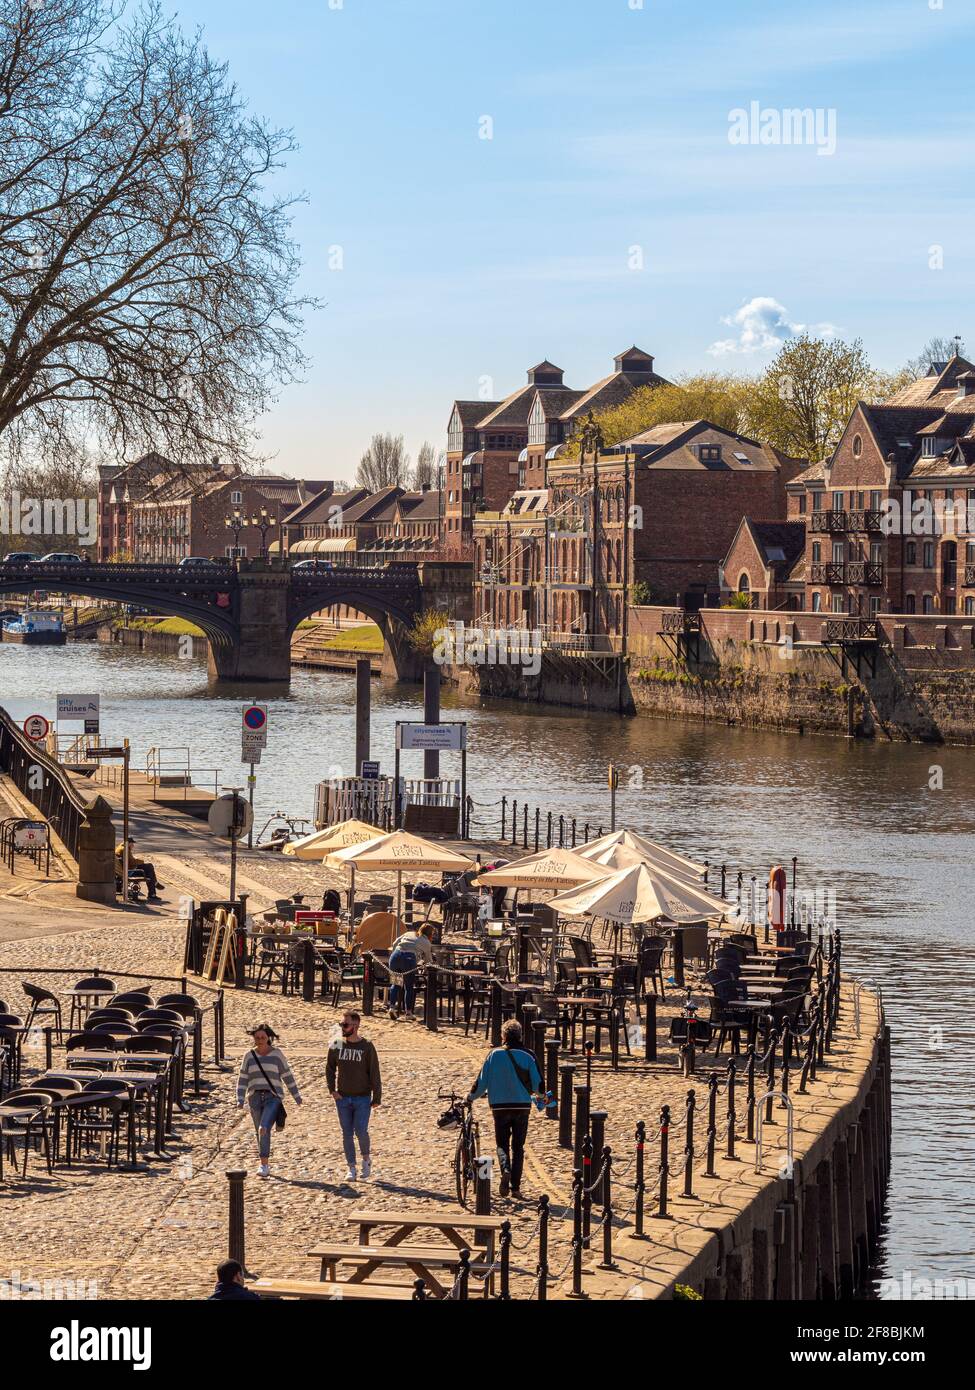 People enjoying meeting outdoors at cafes and bars in York city centre after easing of lockdown restrictions due to covid-19, April 2021. Stock Photo